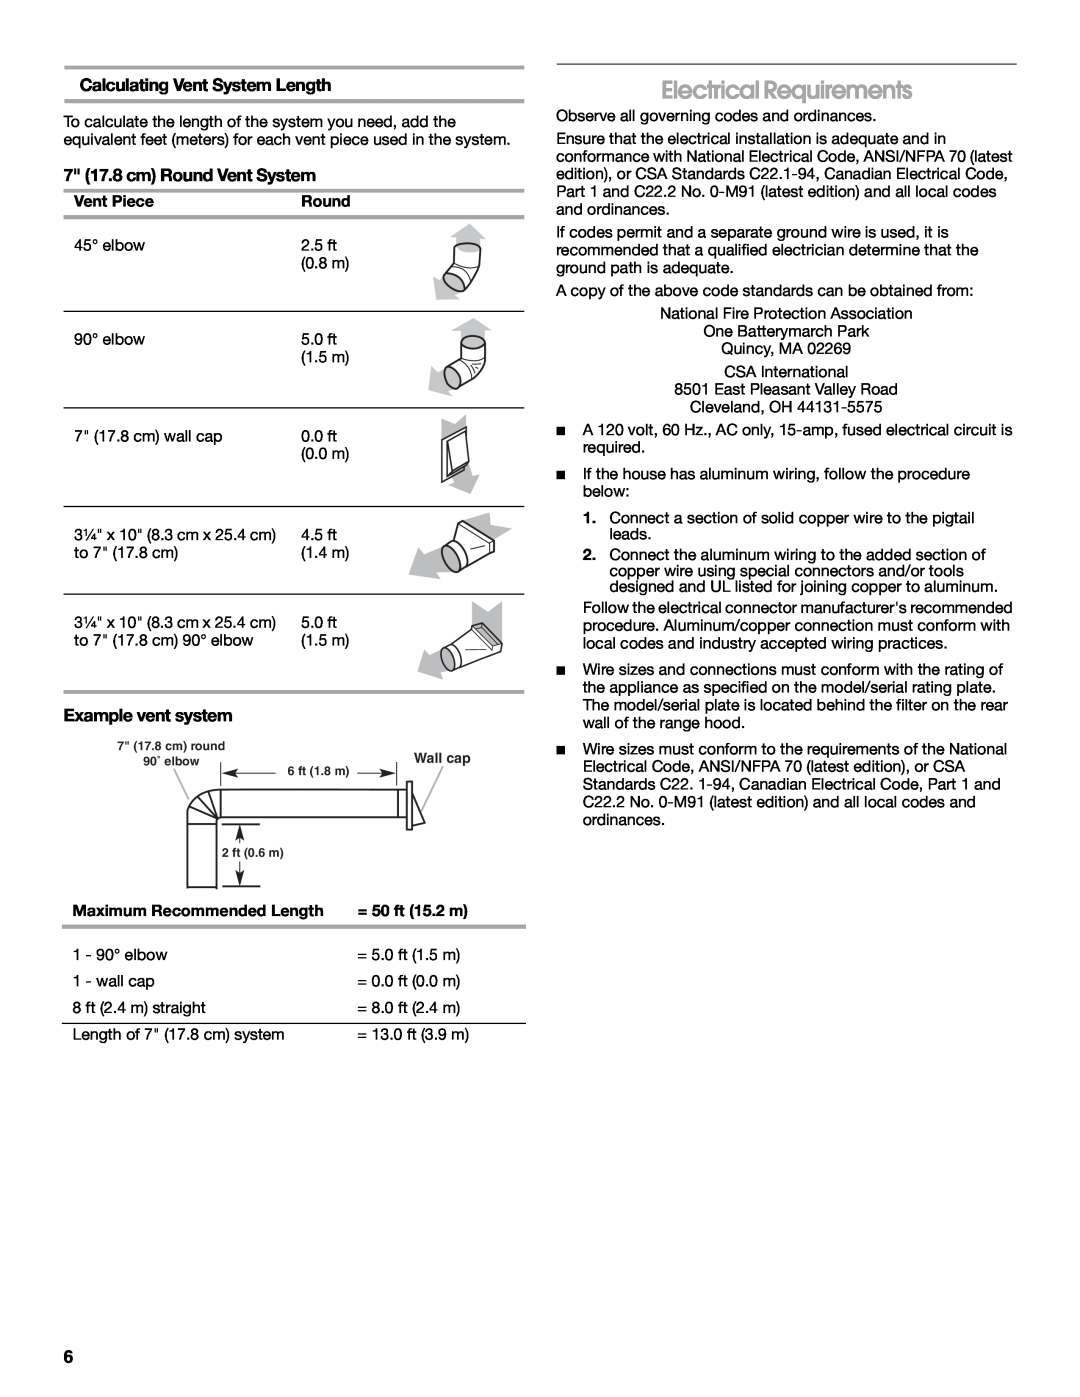 Whirlpool LI3Z2A Electrical Requirements, Calculating Vent System Length, 7 17.8 cm Round Vent System, Example vent system 